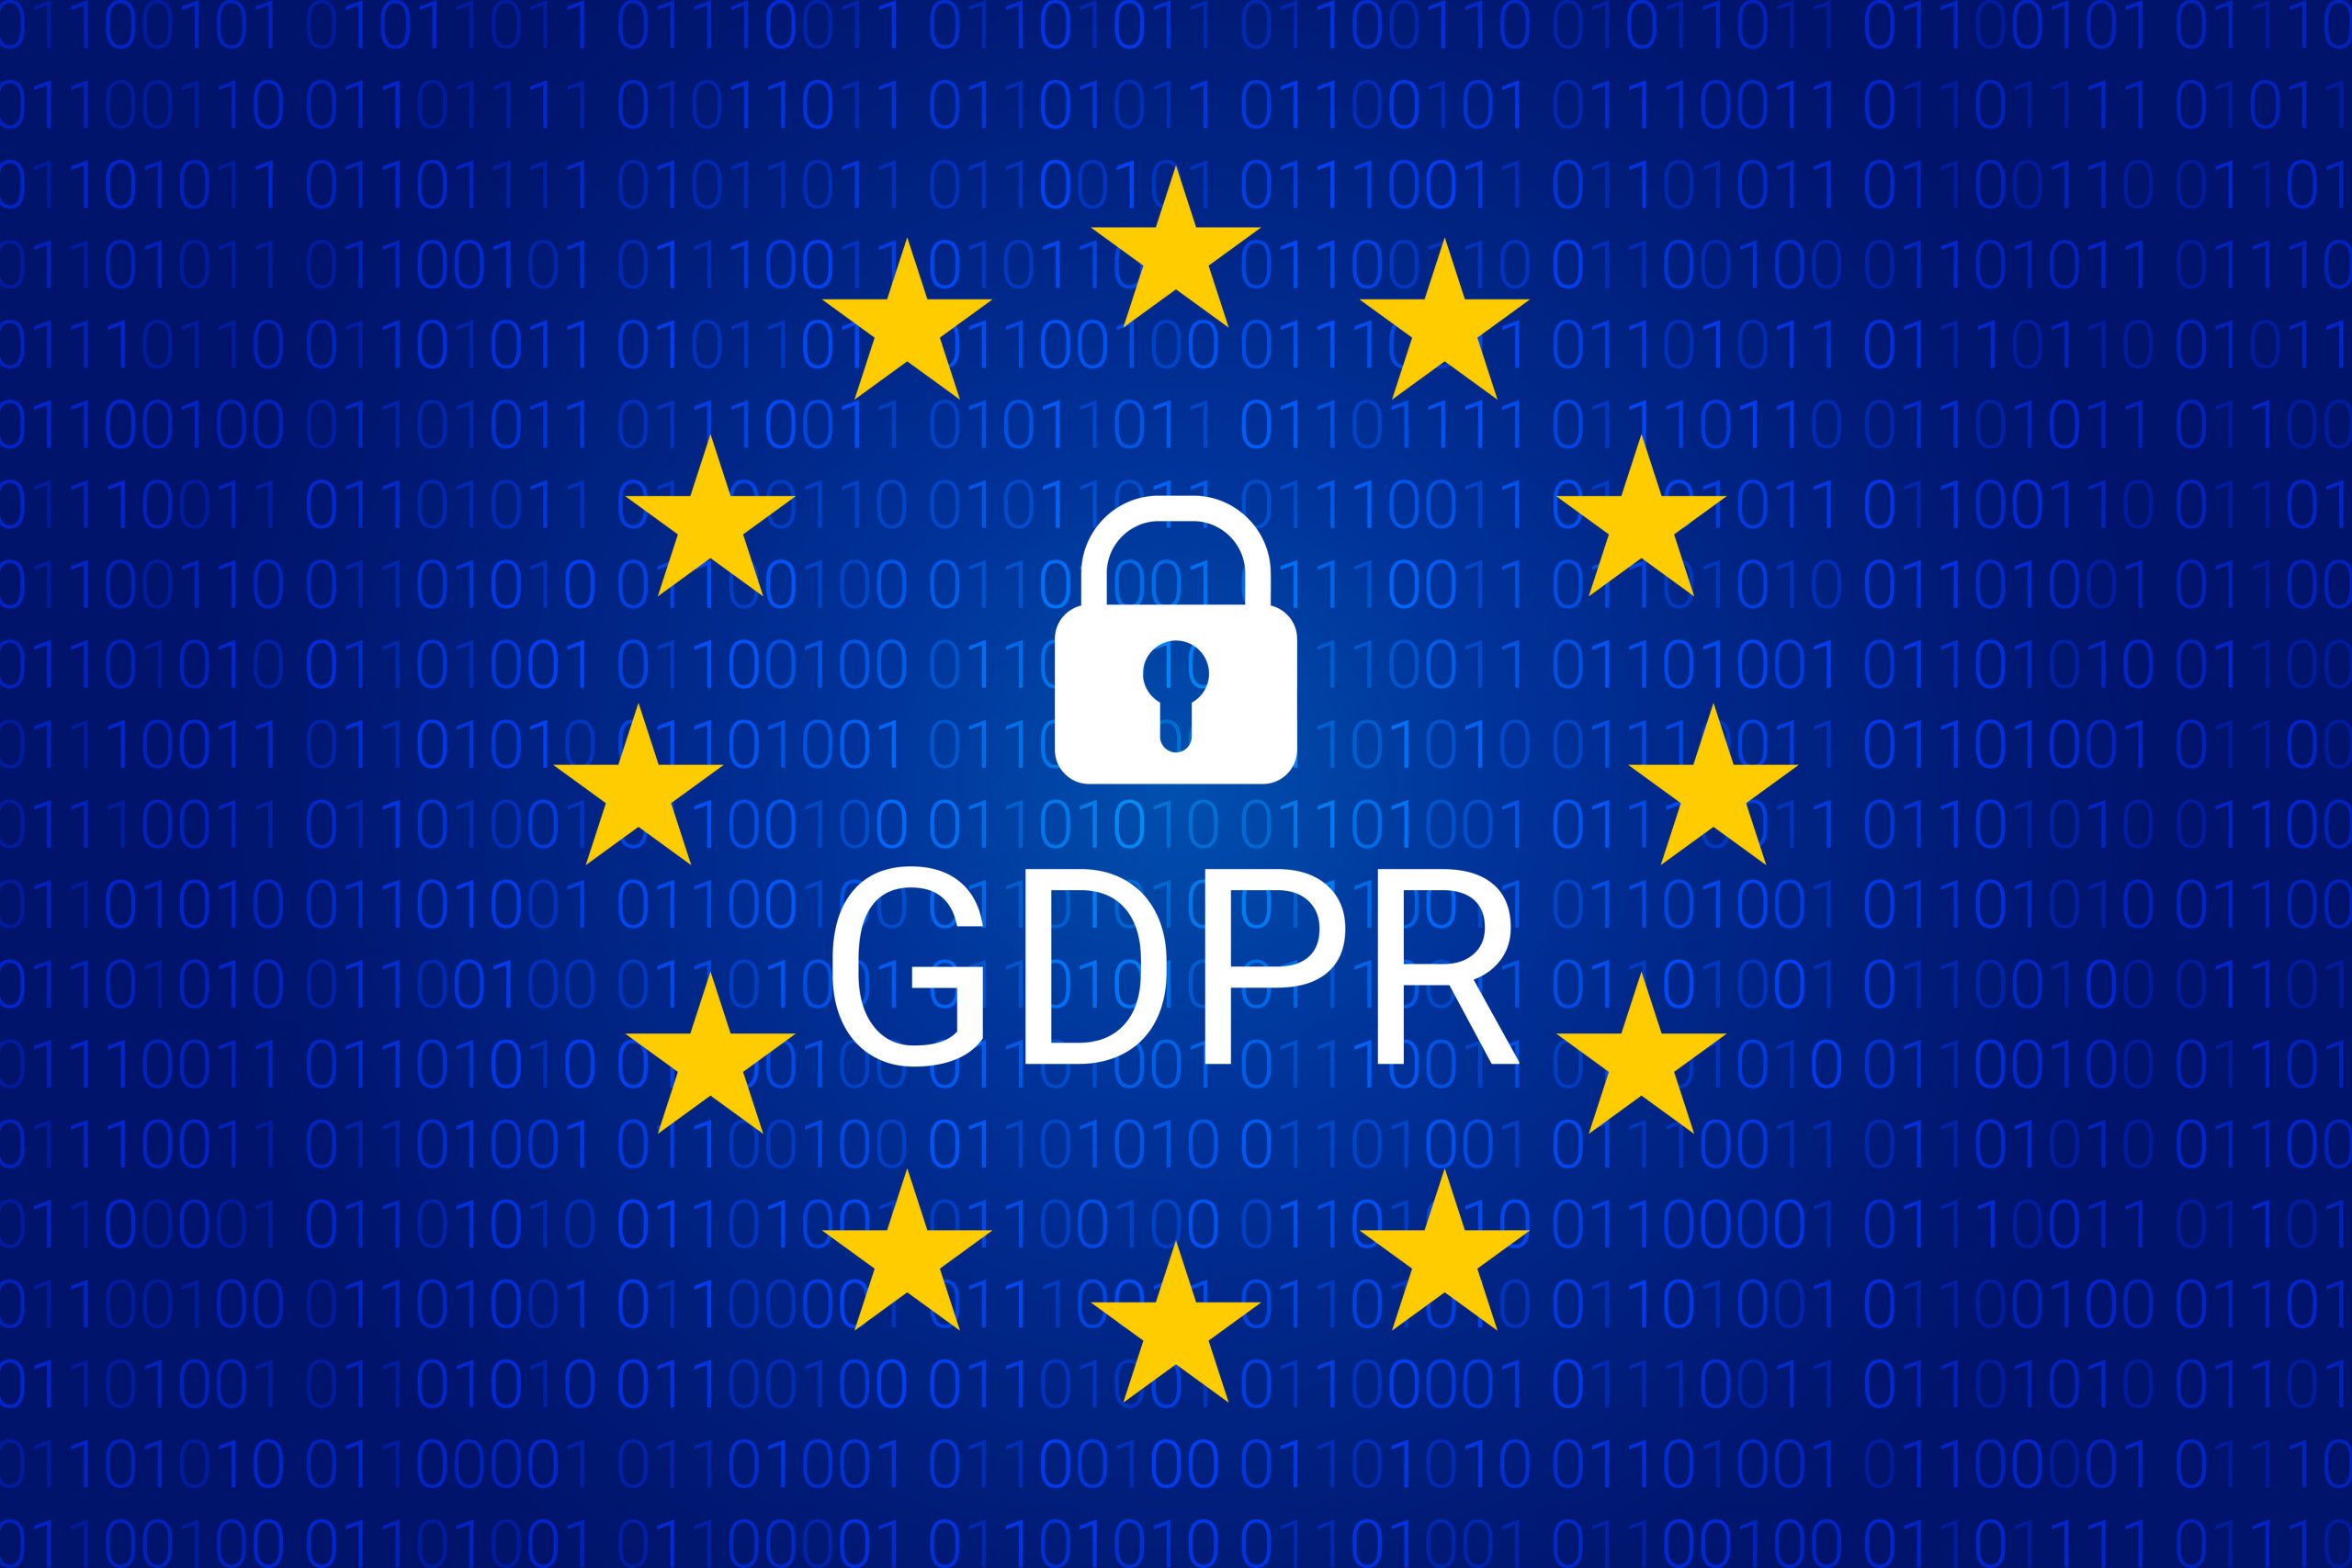 GDPR - General Data Protection Regulation. Security technology background. Vector illustration. GDPR image, a blue background with a white padlock above the text GDPR surrounding by a circle of yellow stars